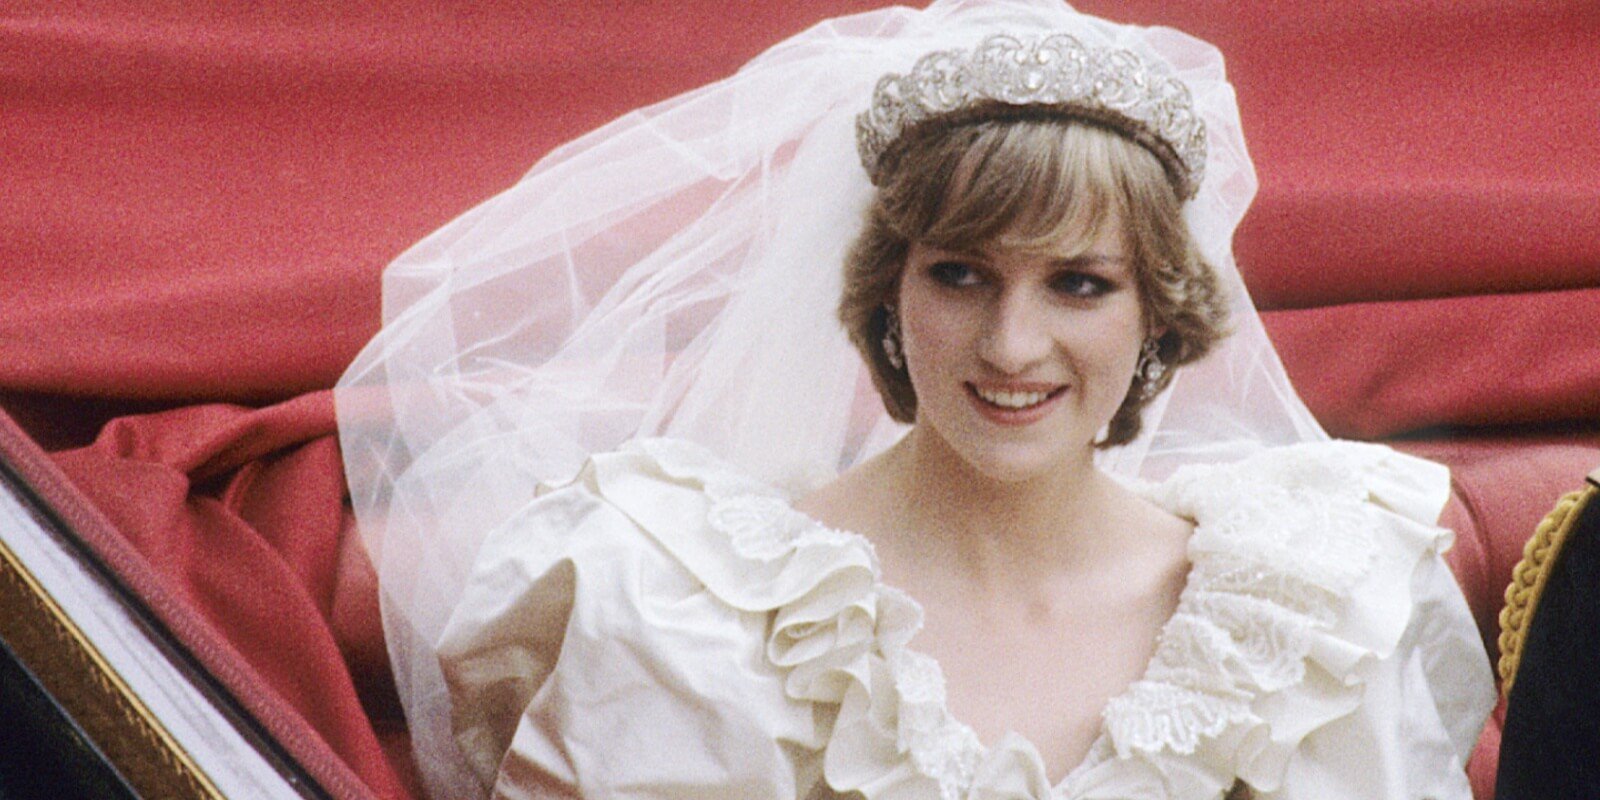 Princess Diana wears Spencer family tiara on her wedding day in 1981.